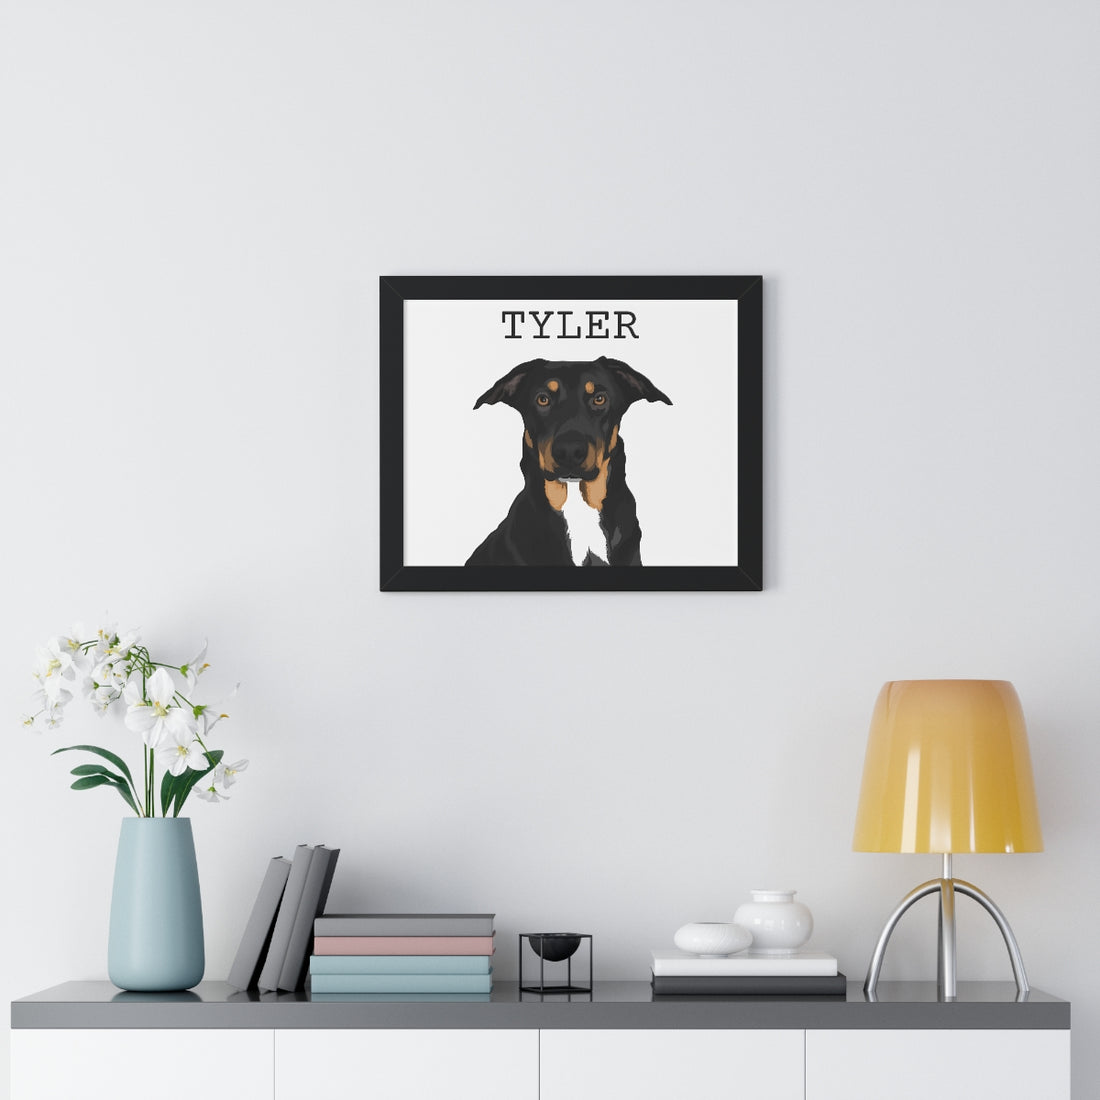 Tips on Decorating Your Living Room Through Pet Portrait Prints